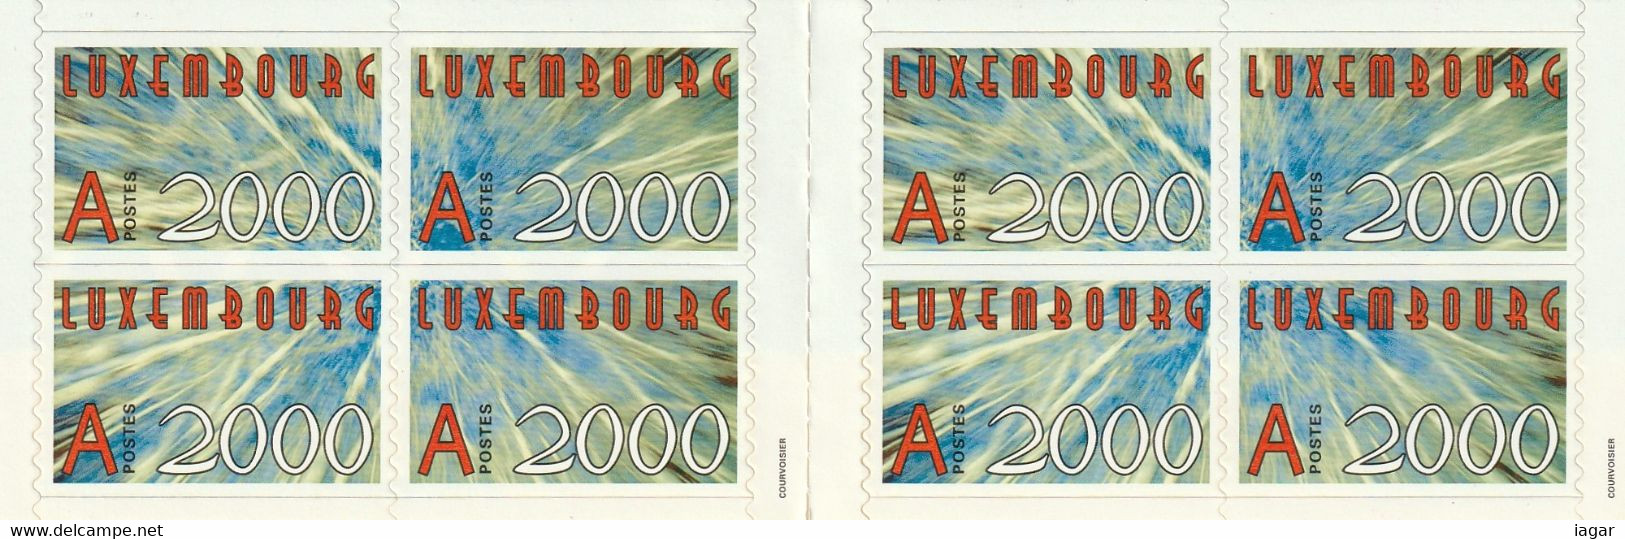 LUXEMBOURG 2000 - BOOKLET 2000 AND LETTER 'A' - Carnets